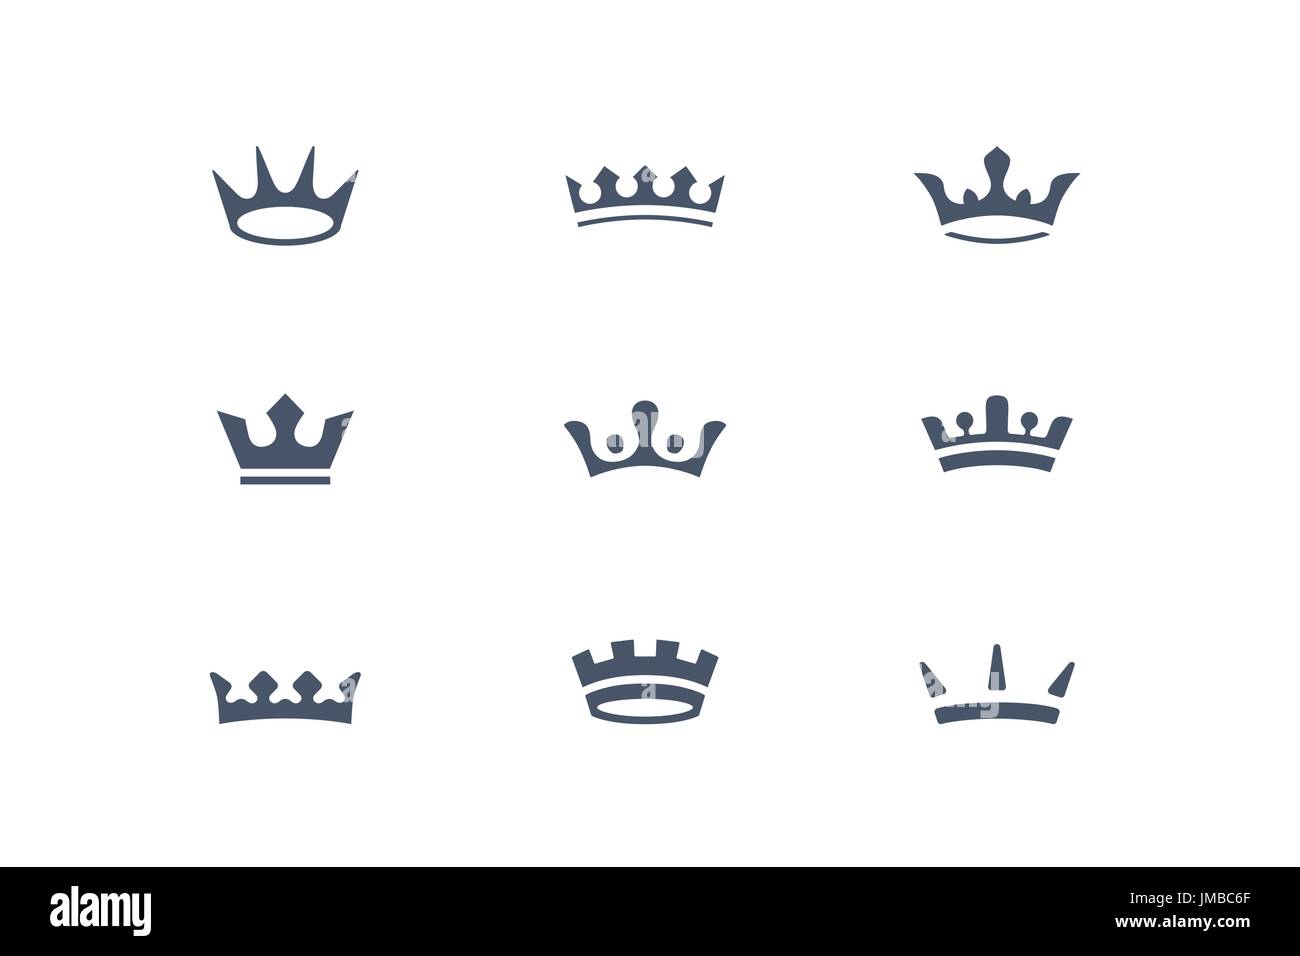 Set of royal crowns, icons and logos Stock Vector